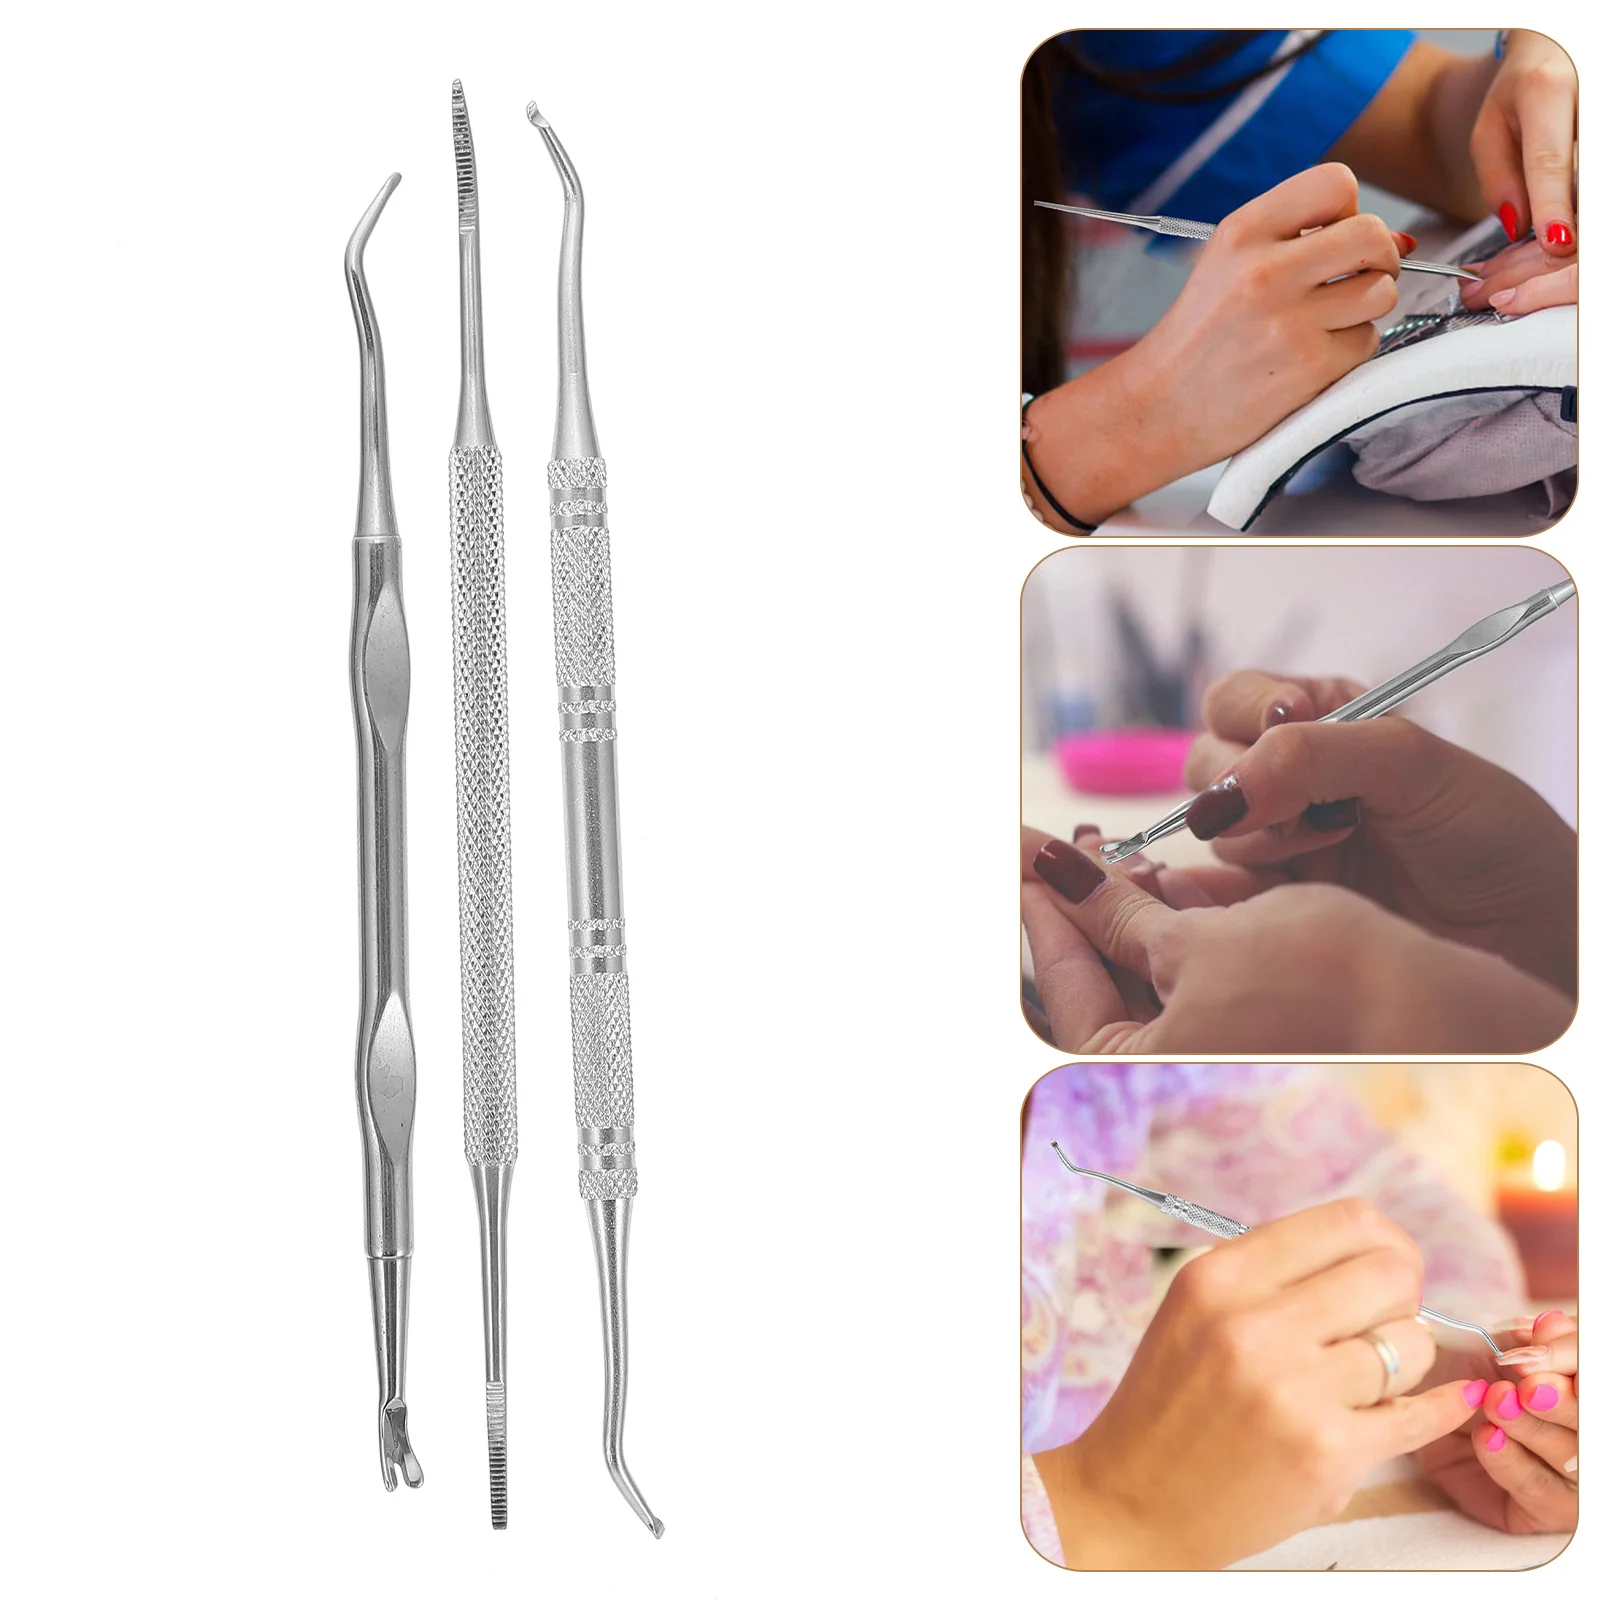 3 Pcs Nail Remover Practical Toenail File Kit Pedicure Tool Ingrown Double-end Cleaner Professional Lifter Dedicated Cleaning 399 pieces professional full set electrician dedicated tools multi function hardware household toolbox